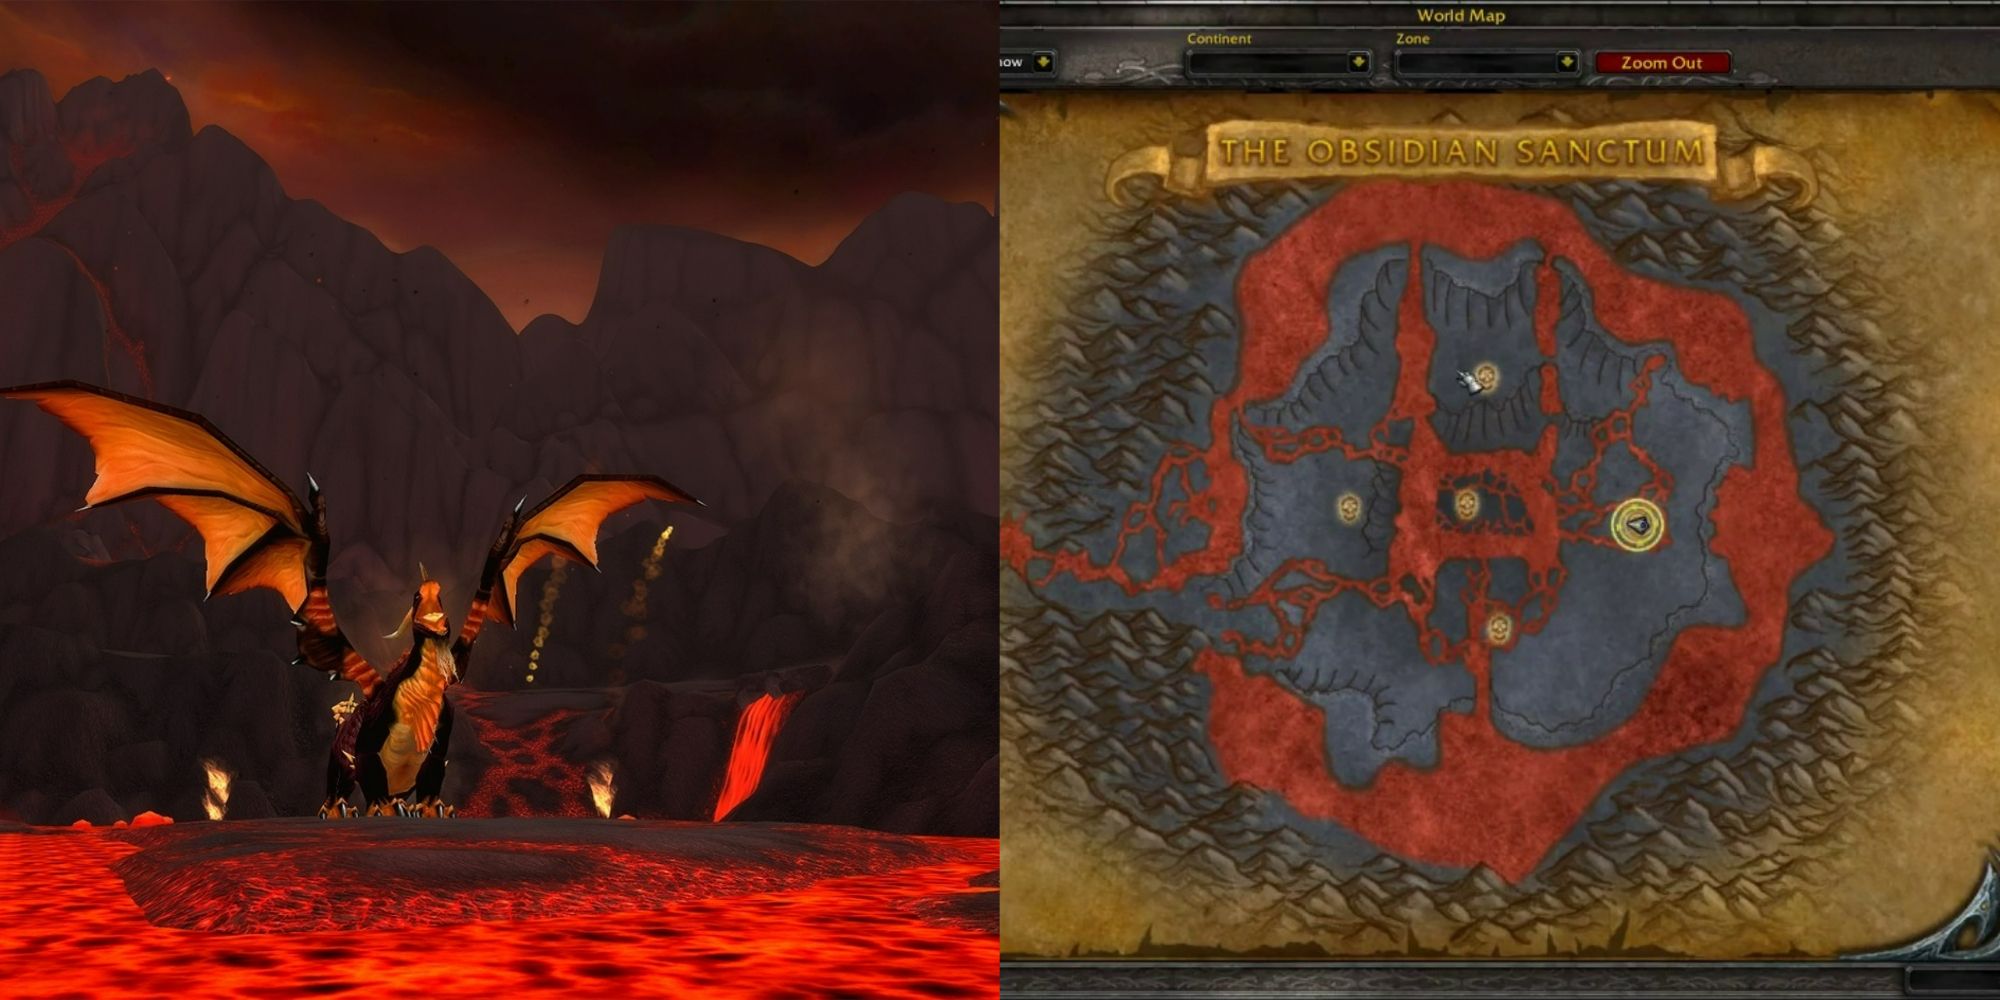 World of Warcraft Wrath of the Lich King split image of Obsidian Sanctum map and Sartharion roaring in game